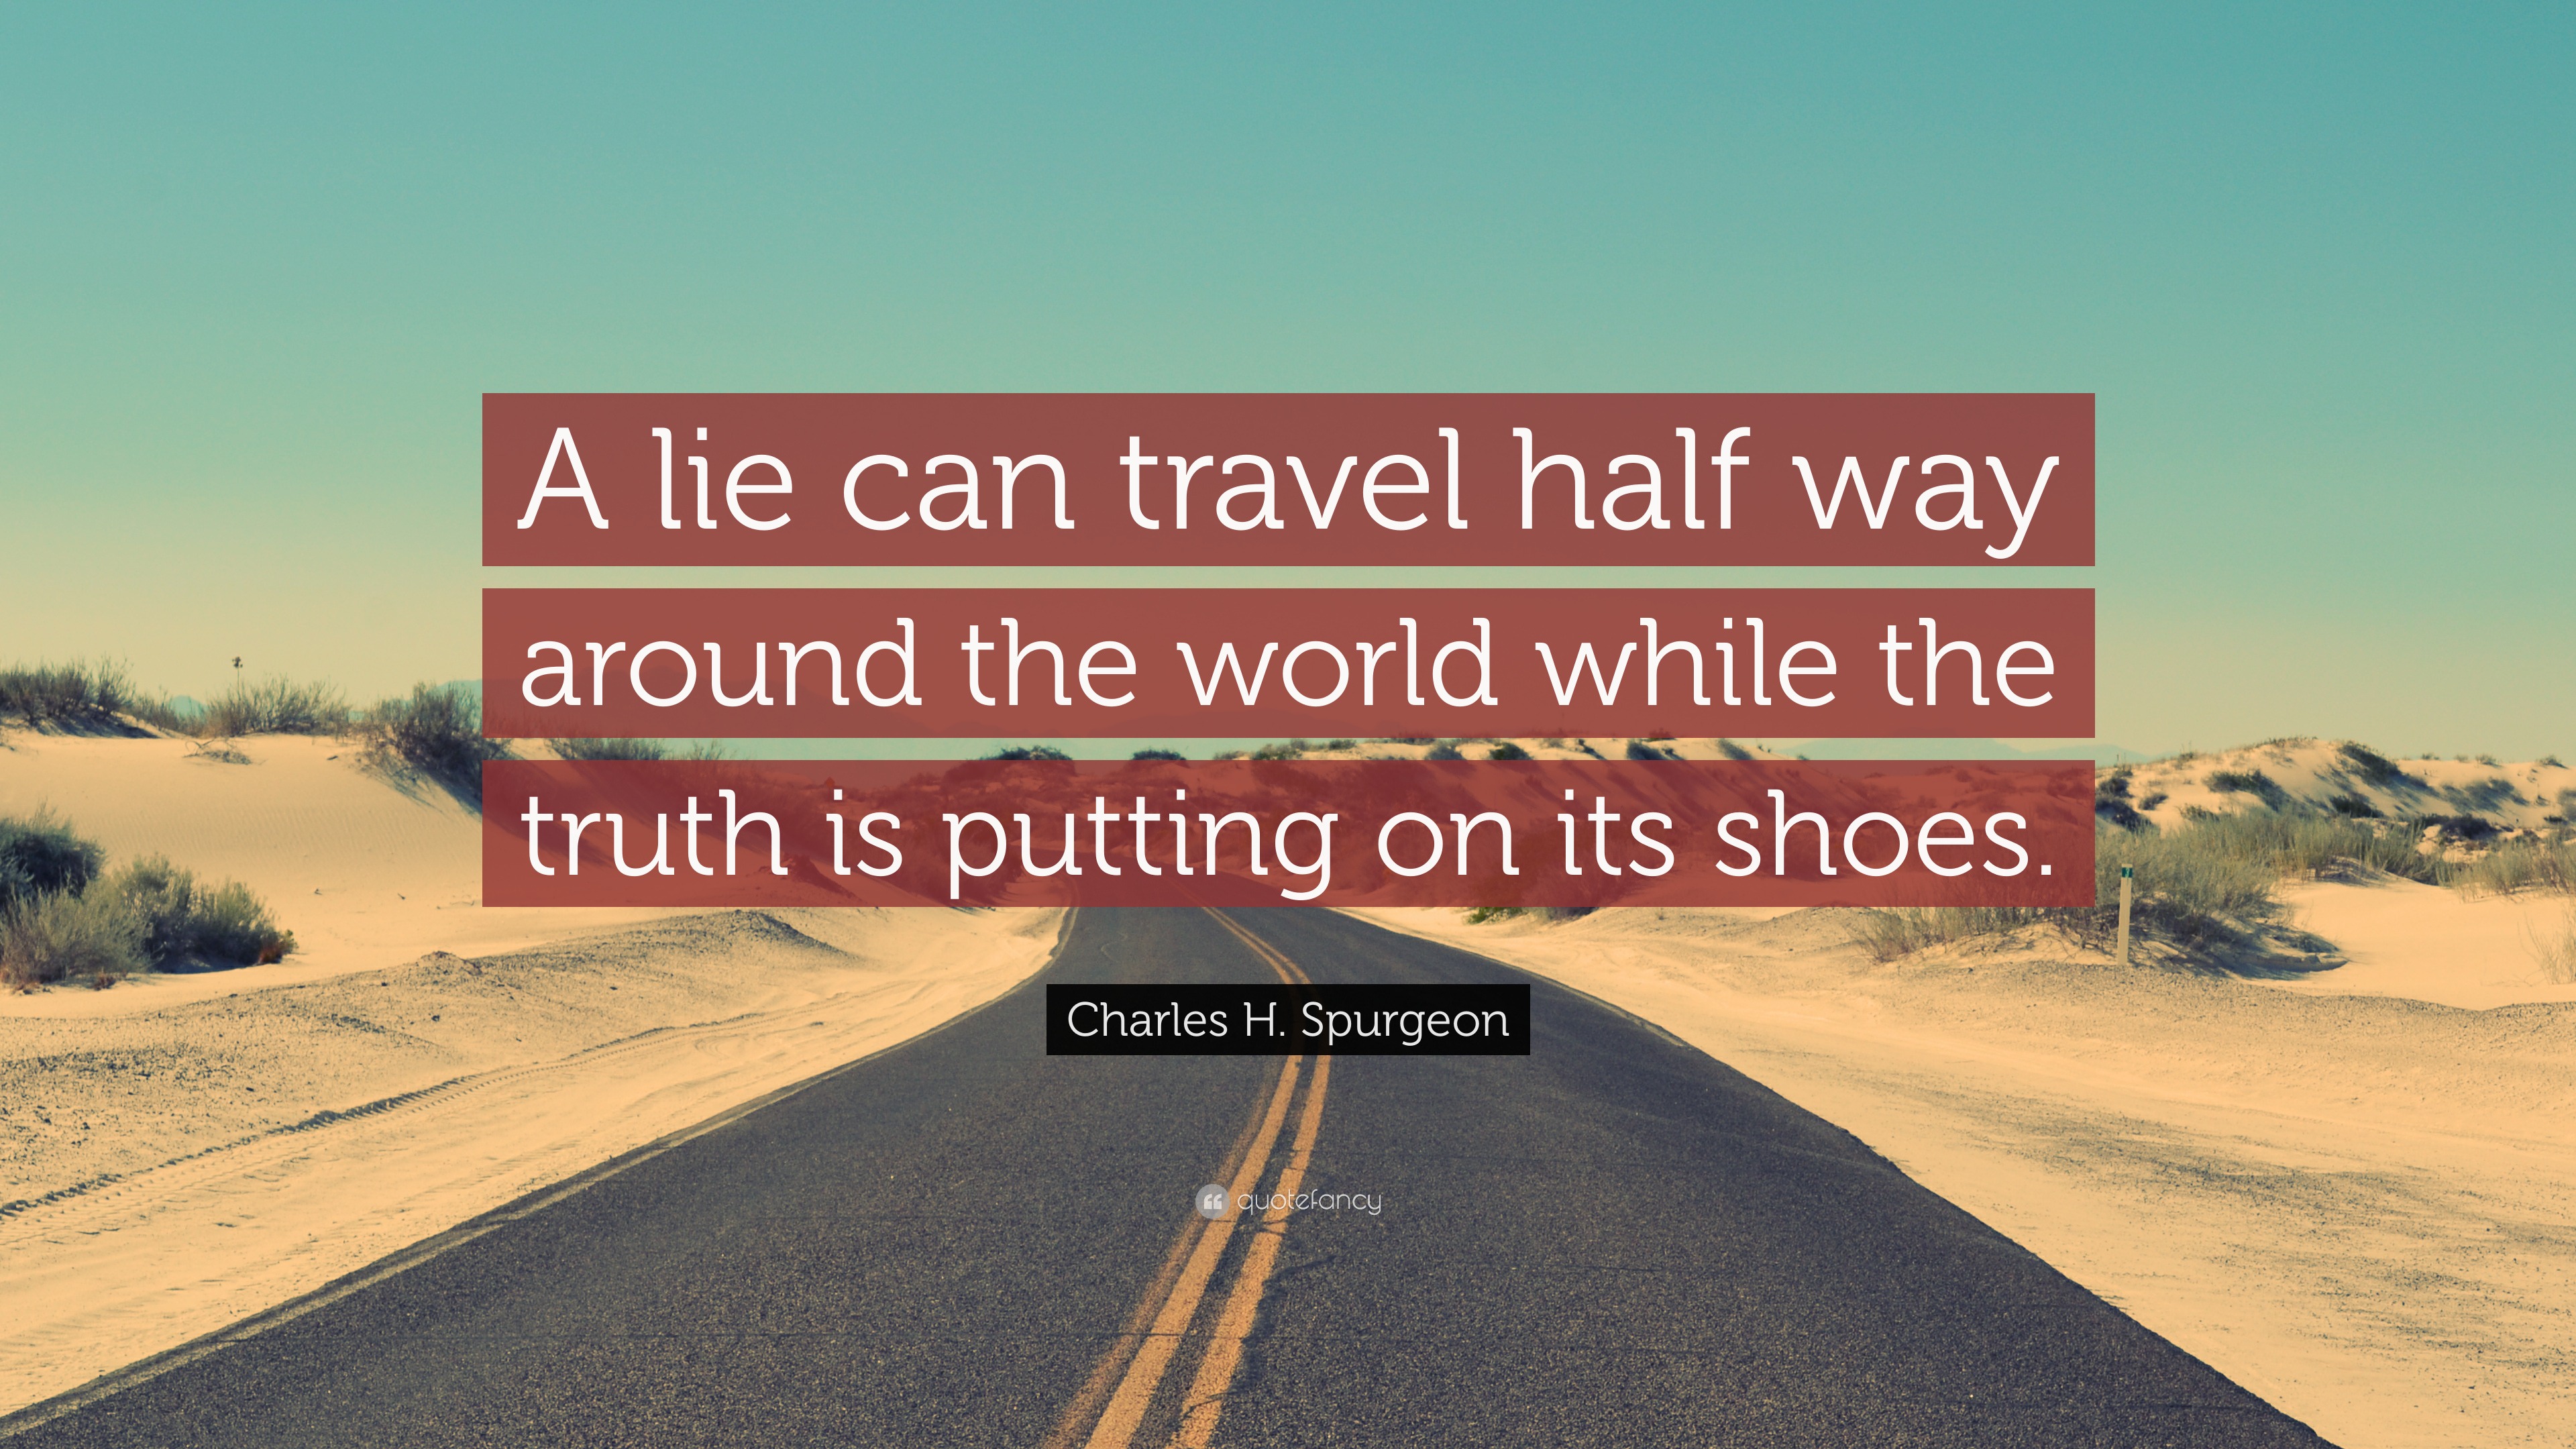 Charles H. Spurgeon Quote “A lie can travel half way